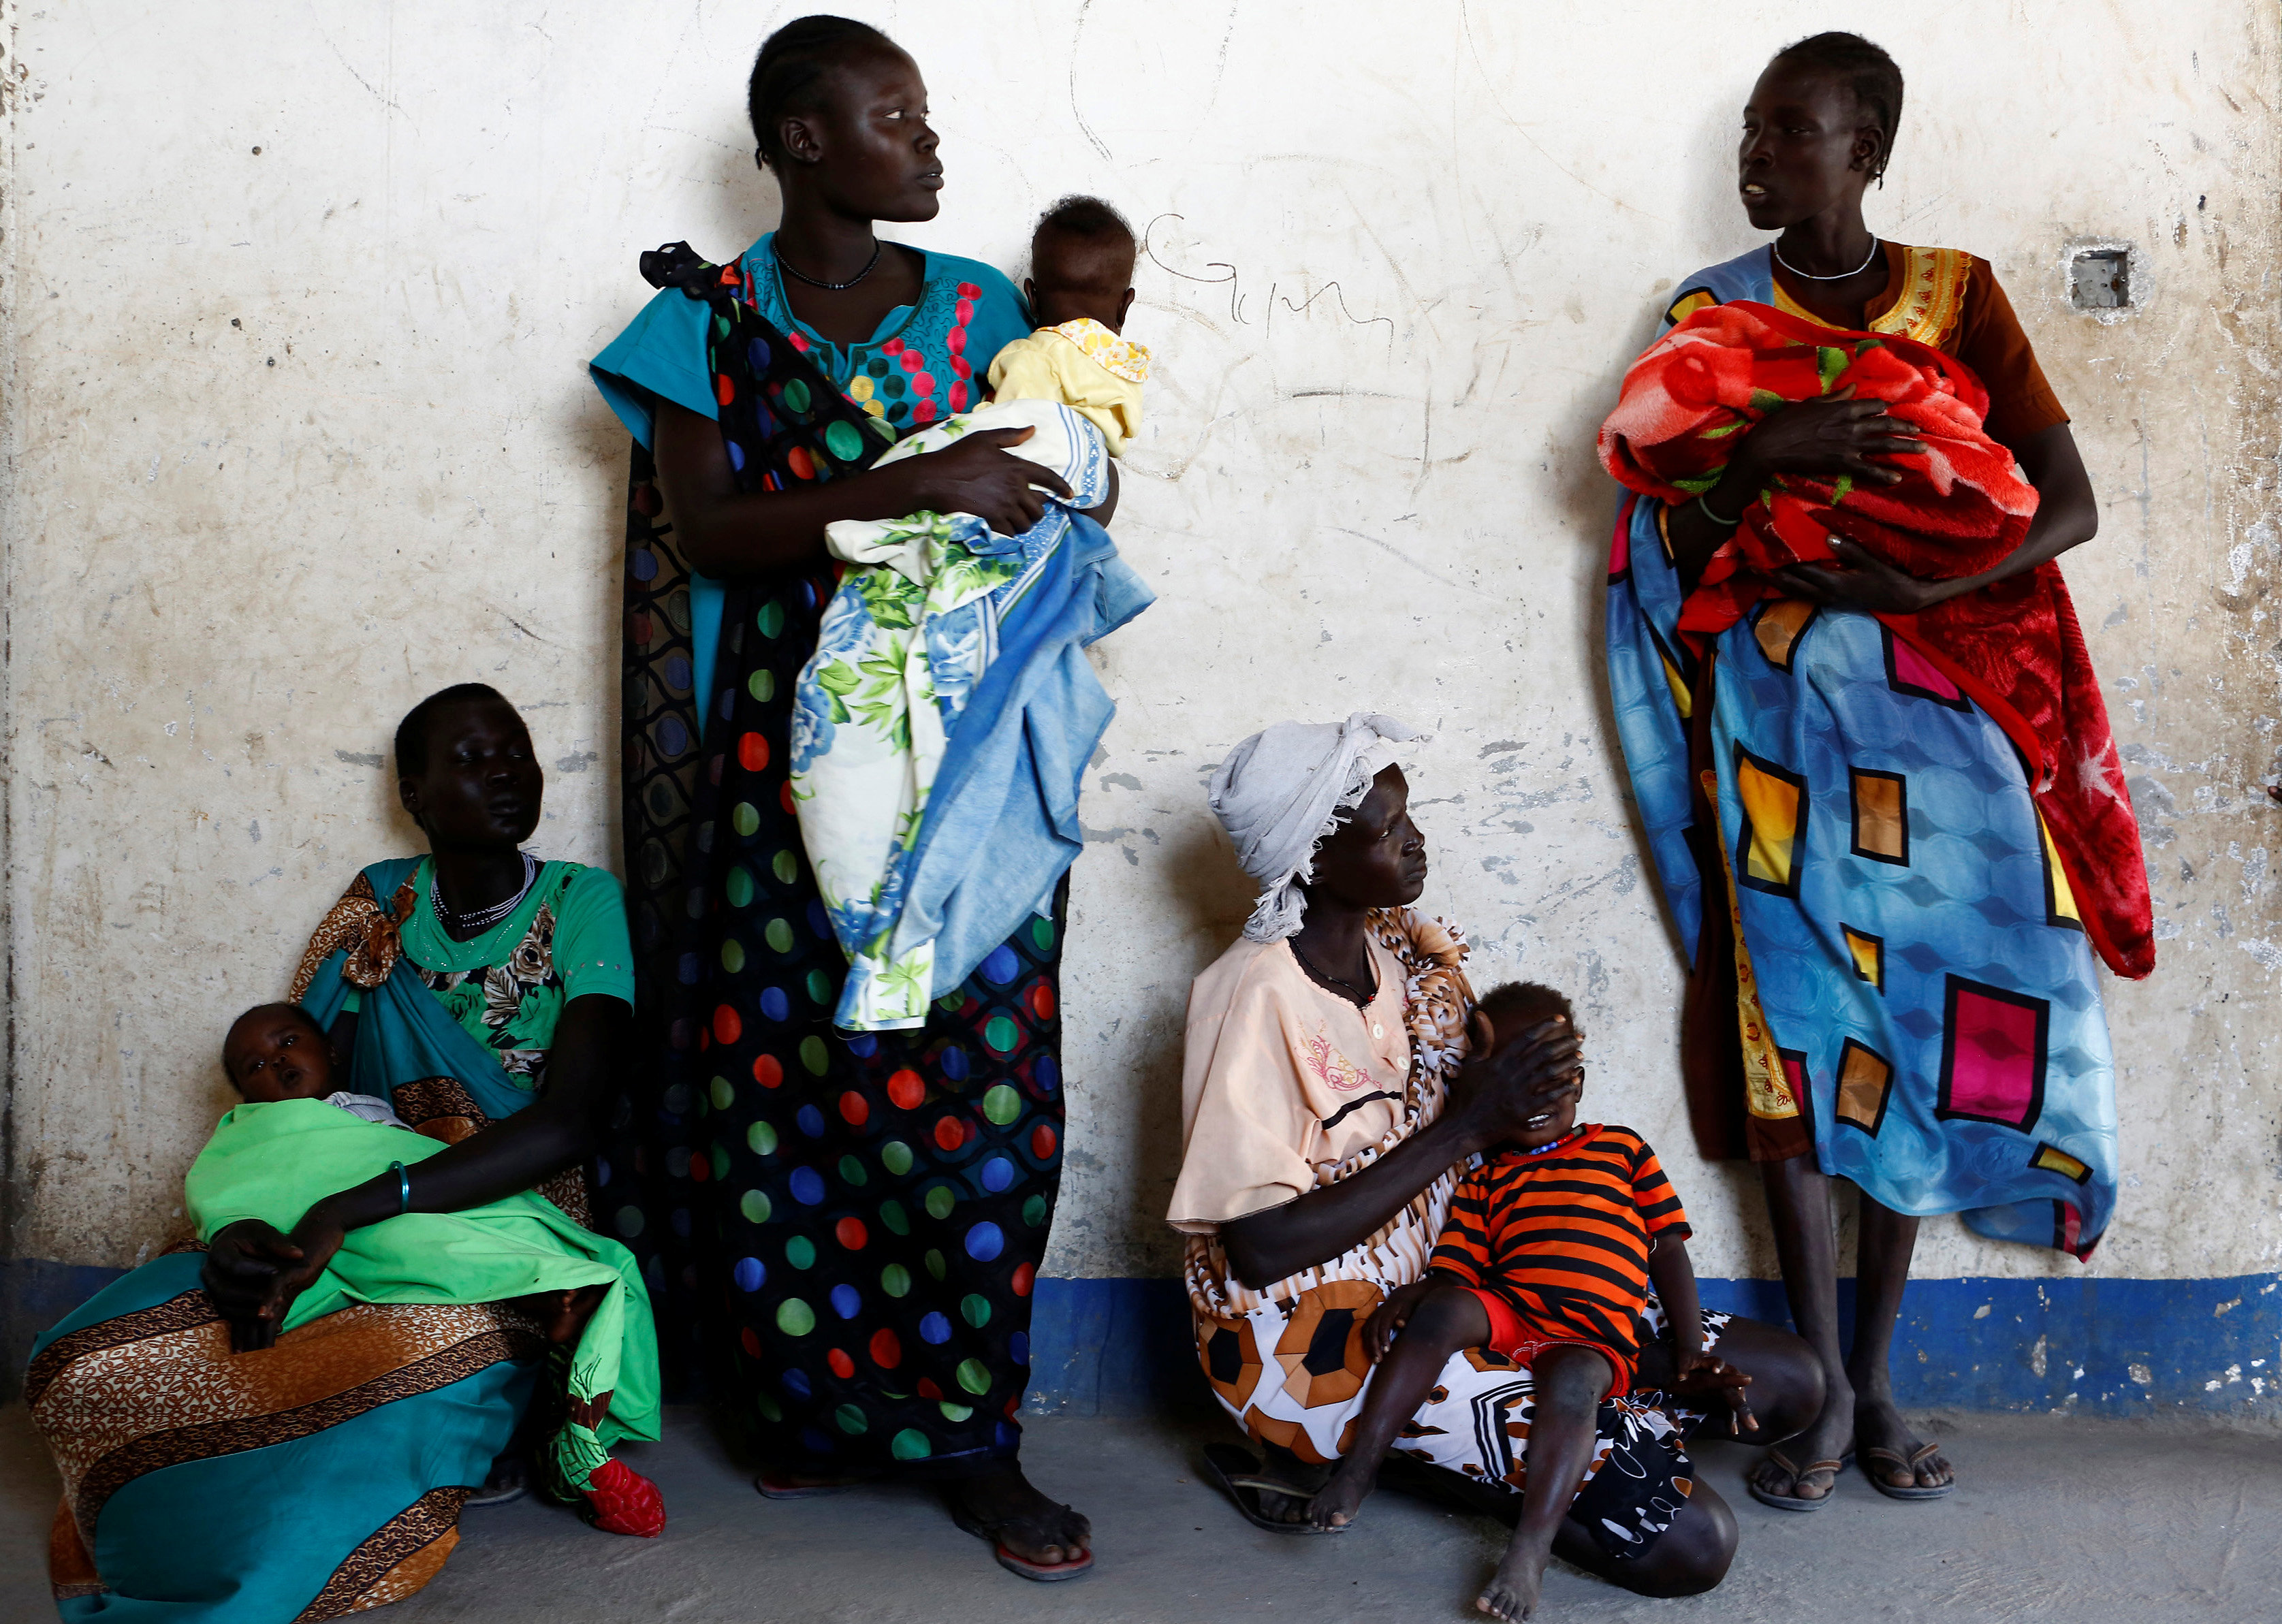 Women hold their babies as they wait for a medical check-up at a United Nations International Children's Fund (UNICEF) supported mobile health clinic in Nimini village, Unity State, South Sudan February 8, 2017. REUTERS/Siegfried Modola